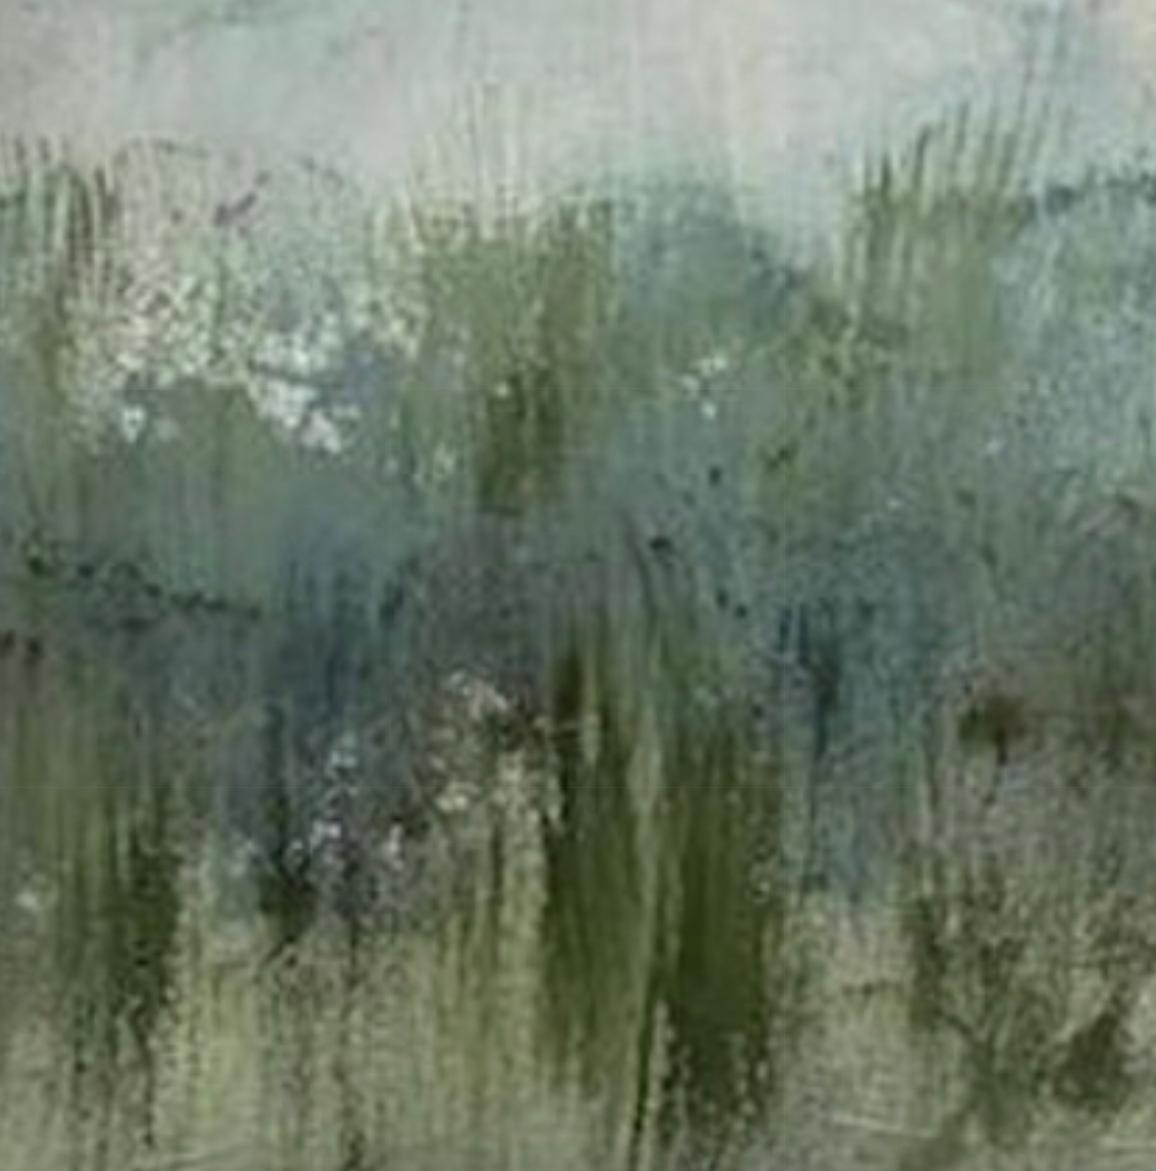 The marsh's brim, Contemporary marsh painting, green, blue, white - Abstract Impressionist Painting by Juanita Bellavance 